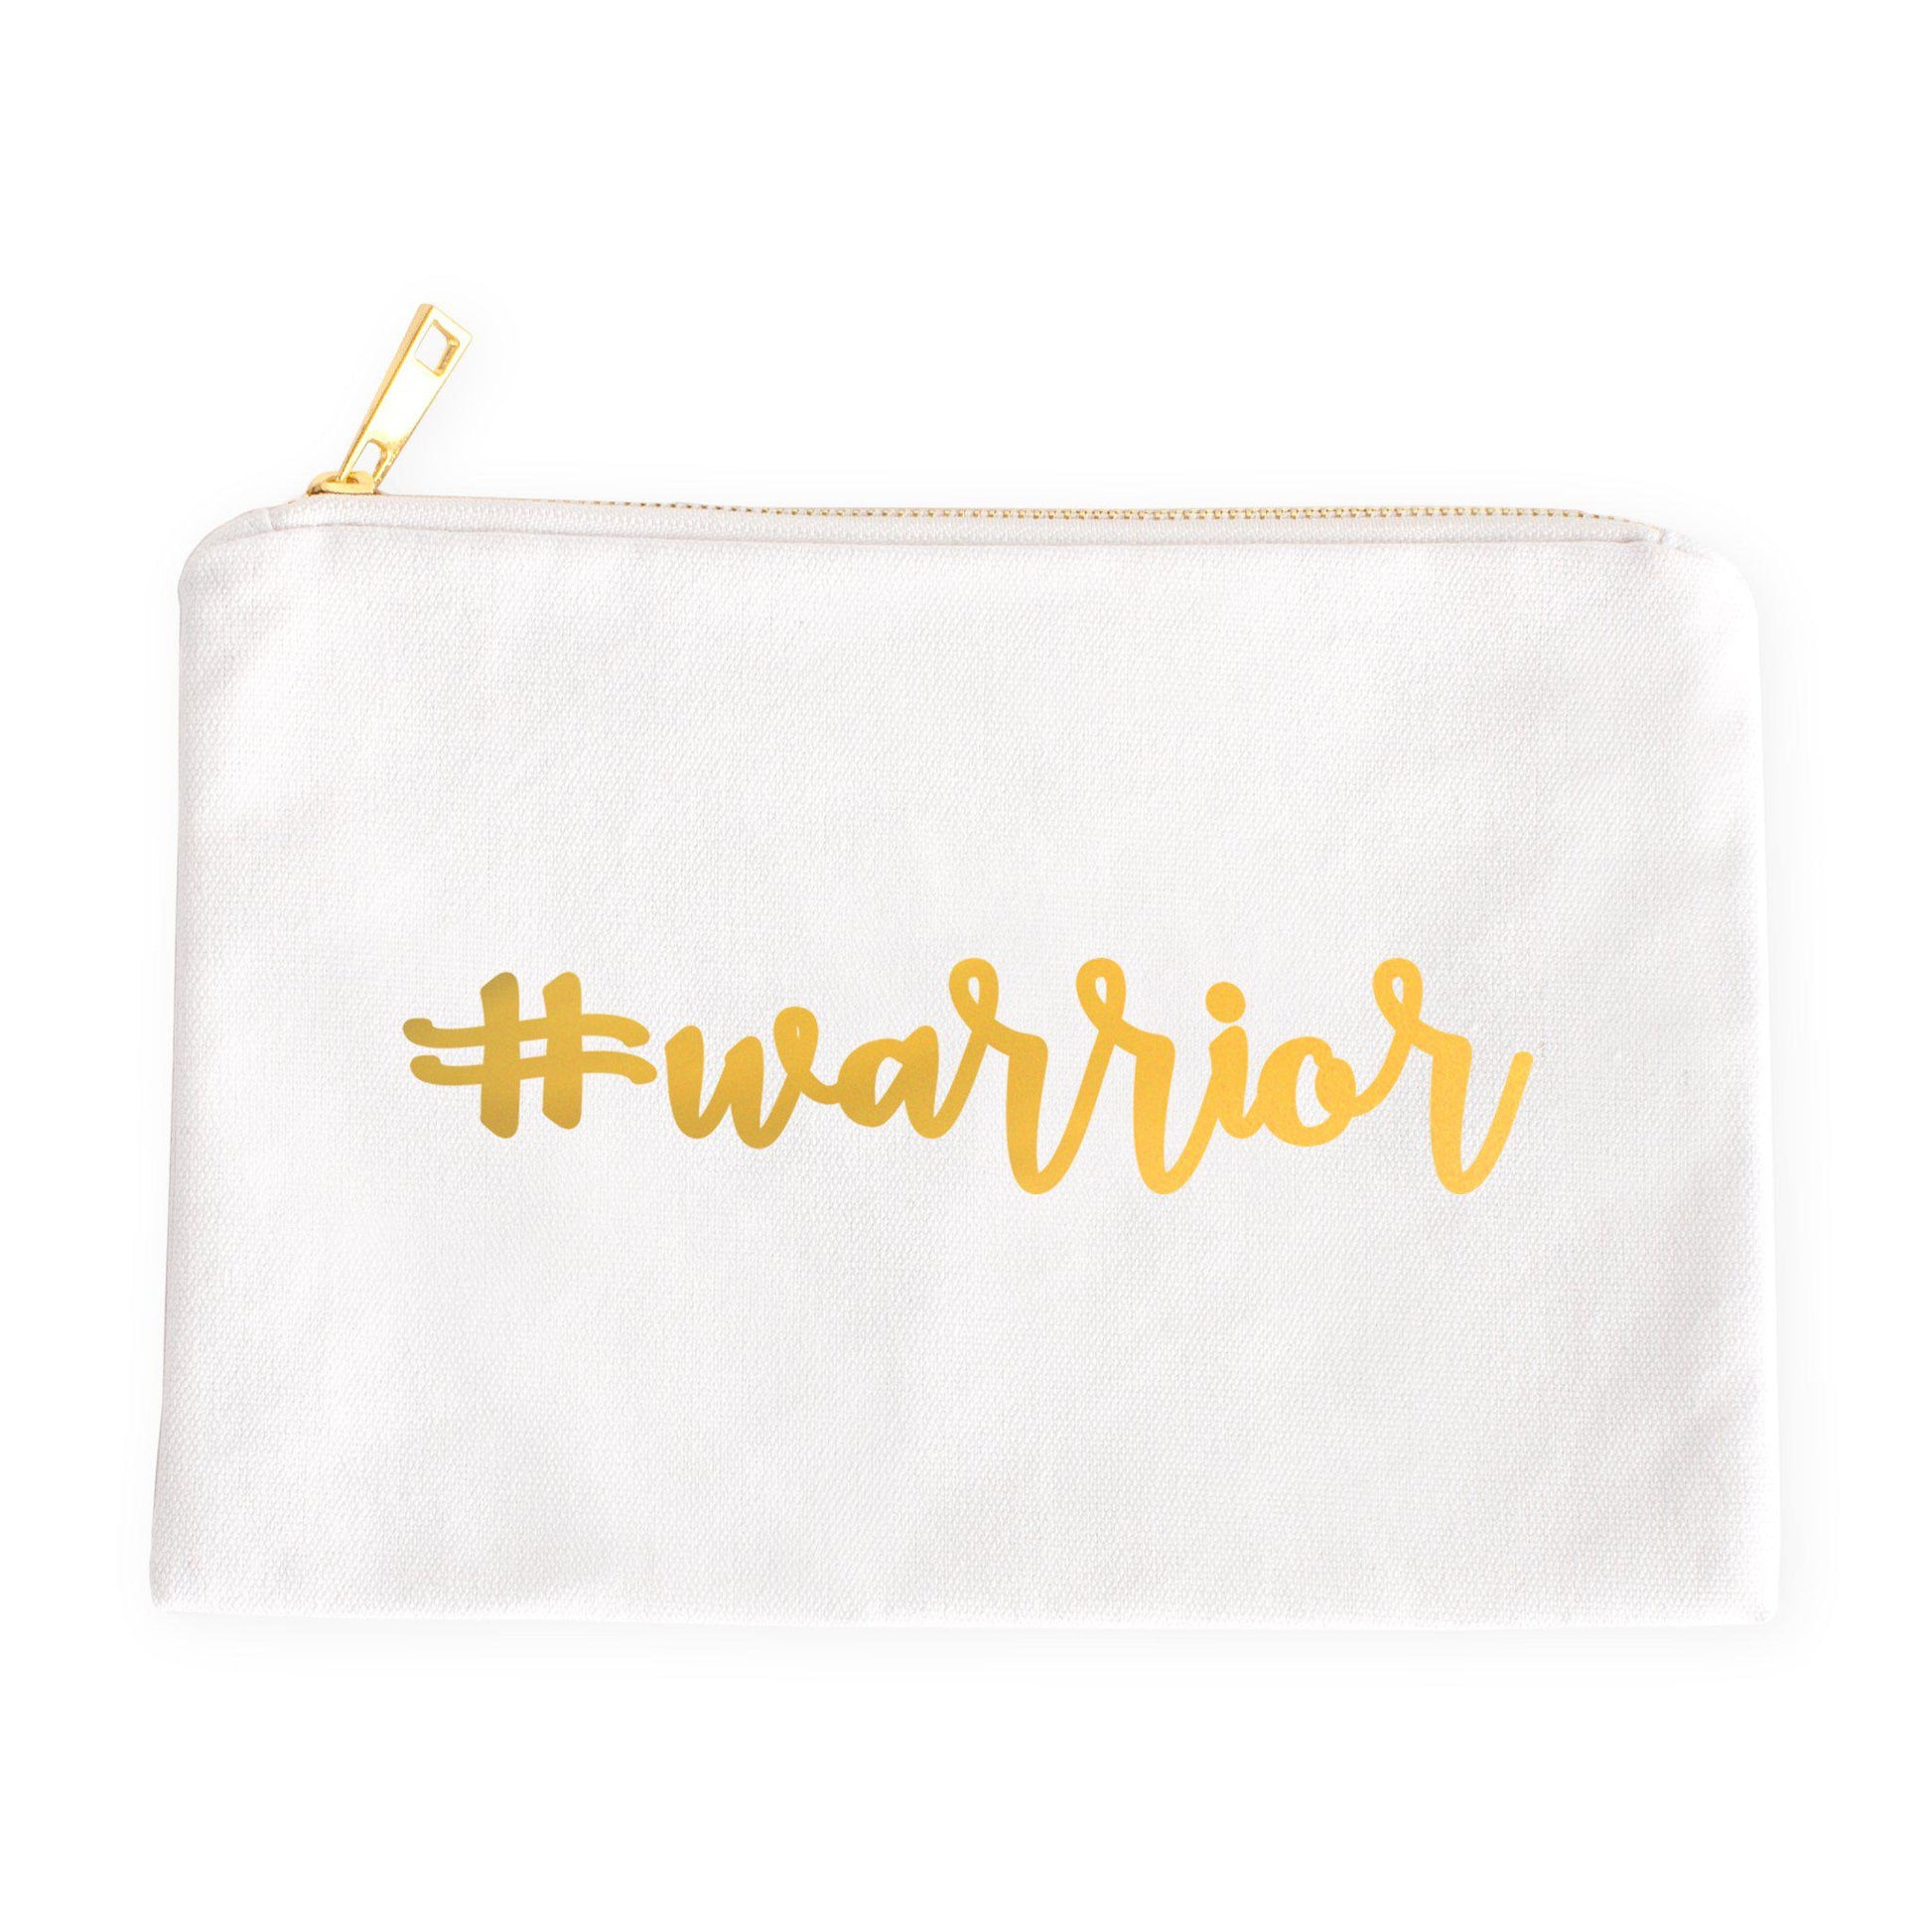 Hashtag Warrior Gold or Silver Foil Canvas Pouch in Black, Pink, or White-Luxe Palette